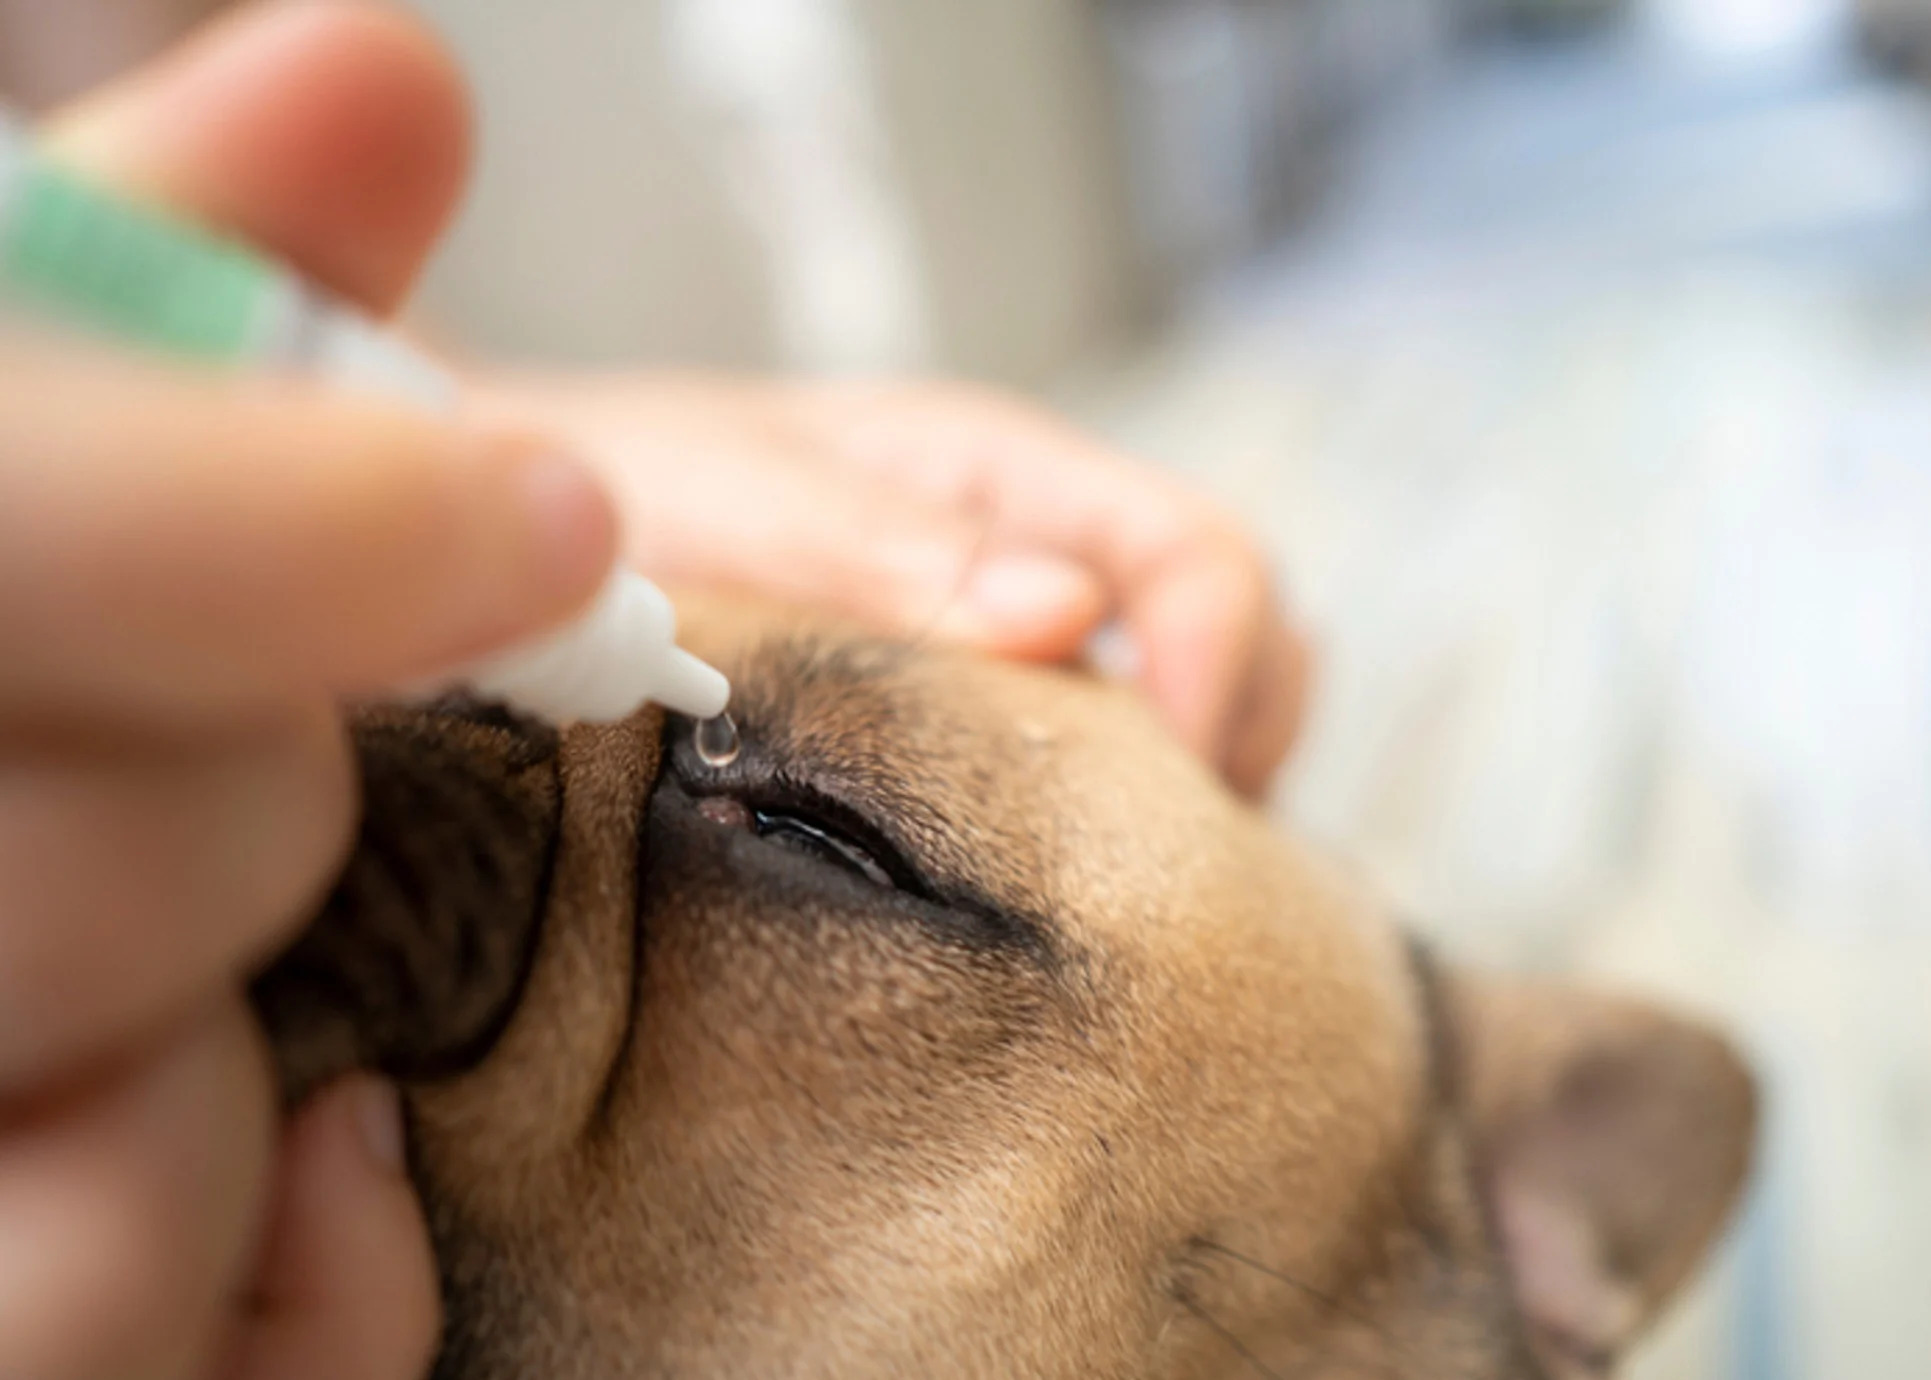 How To Apply Ointment In Dog’s Eye